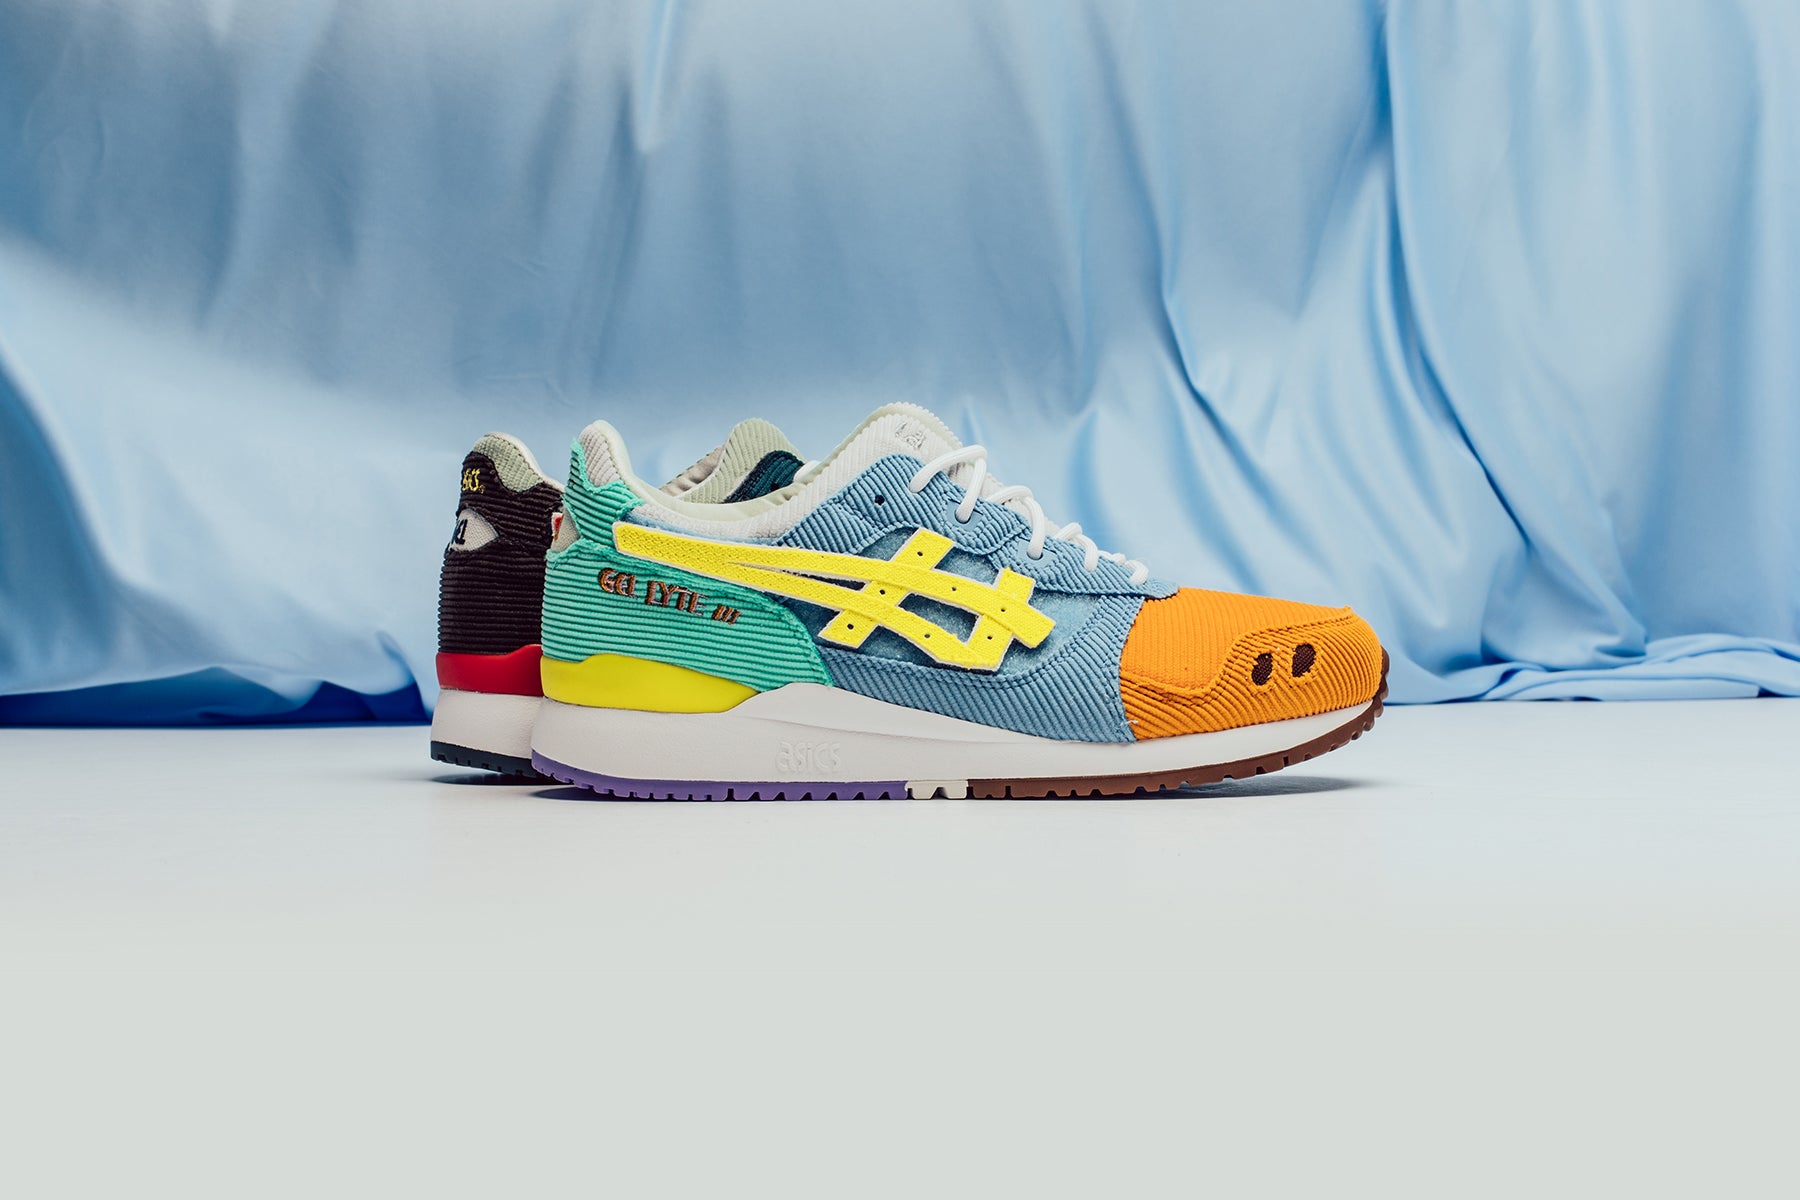 Sean Wotherspoon x Atmos x ASICS Gel Lyte III 'Corduroy' Releases